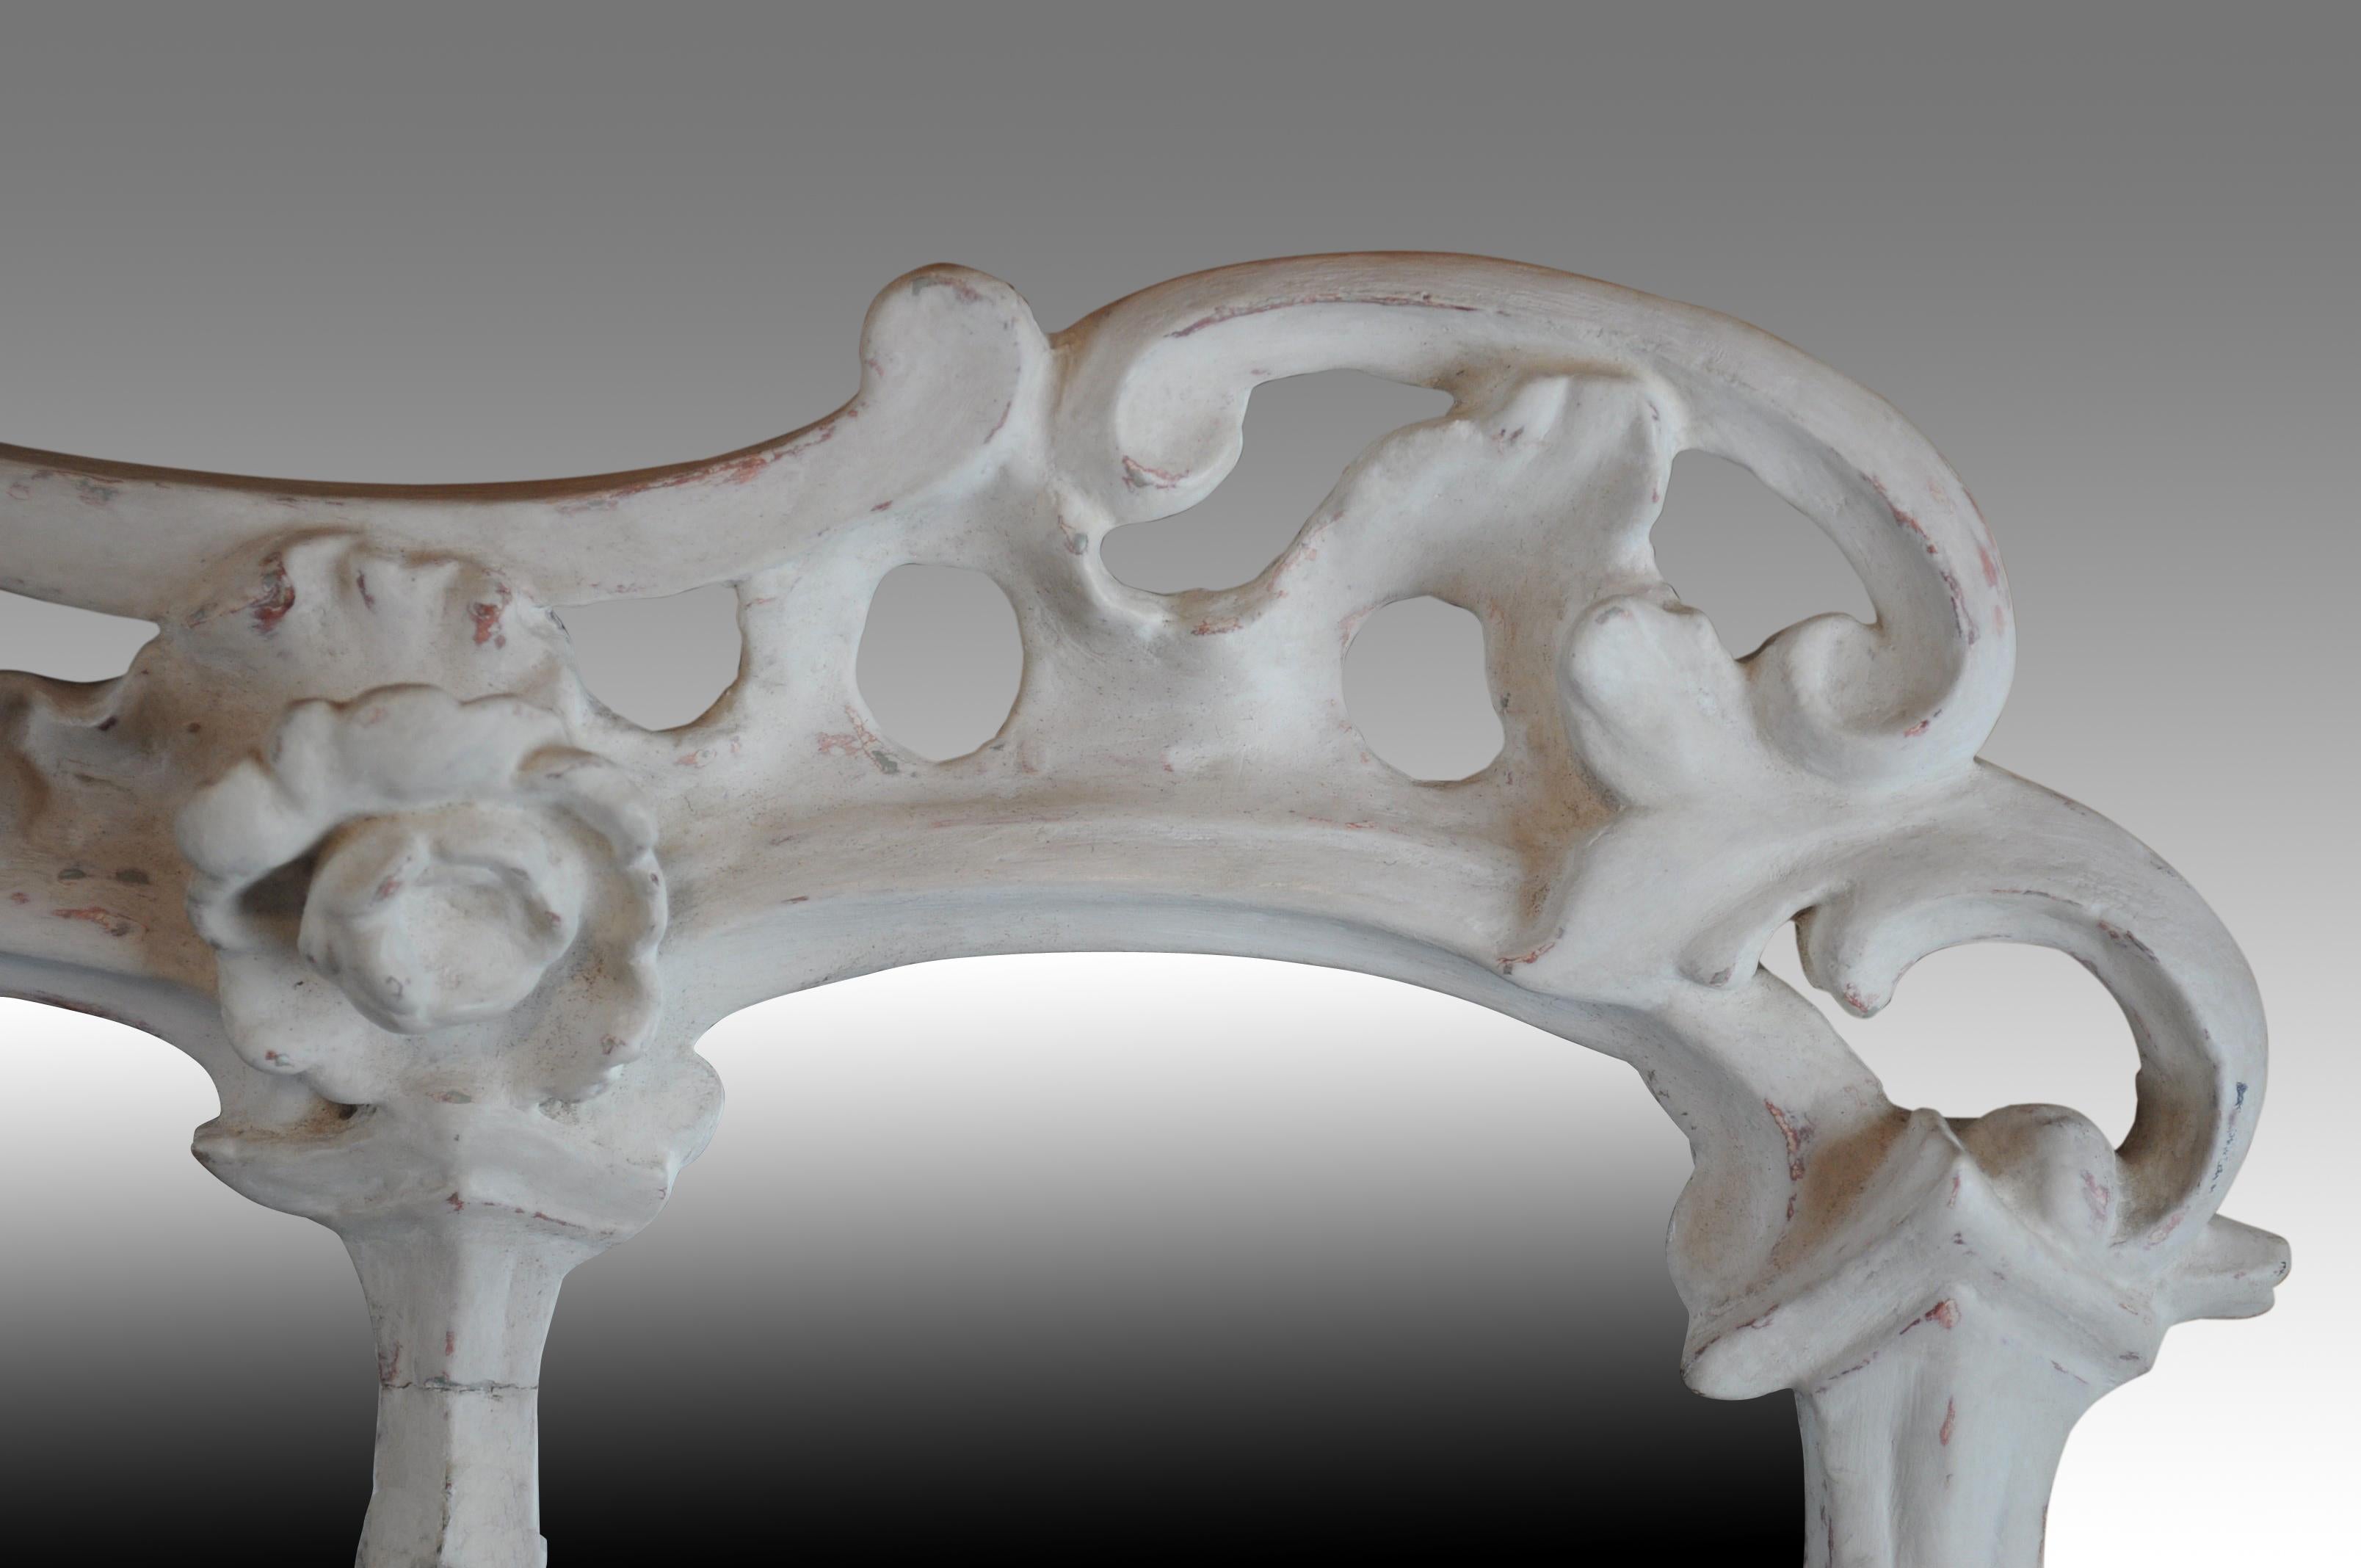 A good 18th century foliate carved three plate over-mantel mirror with carved scrolls, flowerheads and foliage.
Originally gilded, now painted. Later glass.